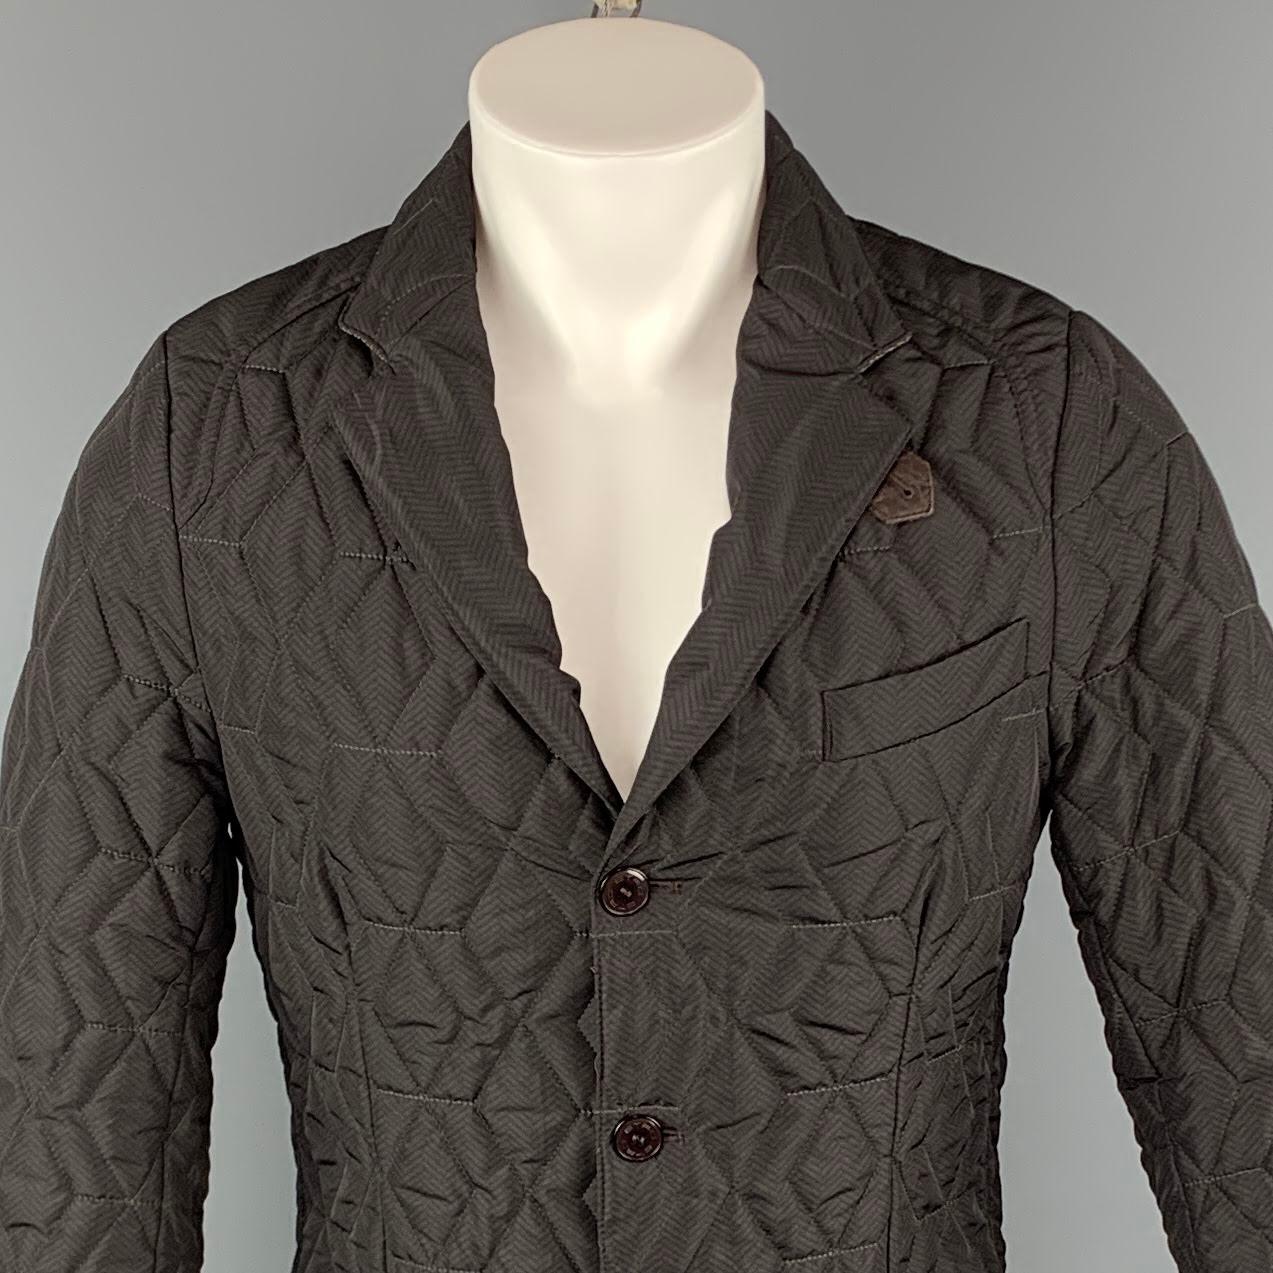 ETRO jacket comes in a brown quilted polyester featuring a notch lapel style, brown leather buttoned collar detail, three button closure, and front patch pockets. Made in Italy.

Excellent Pre-Owned Condition.
Marked: M

Measurements:

l Shoulder: